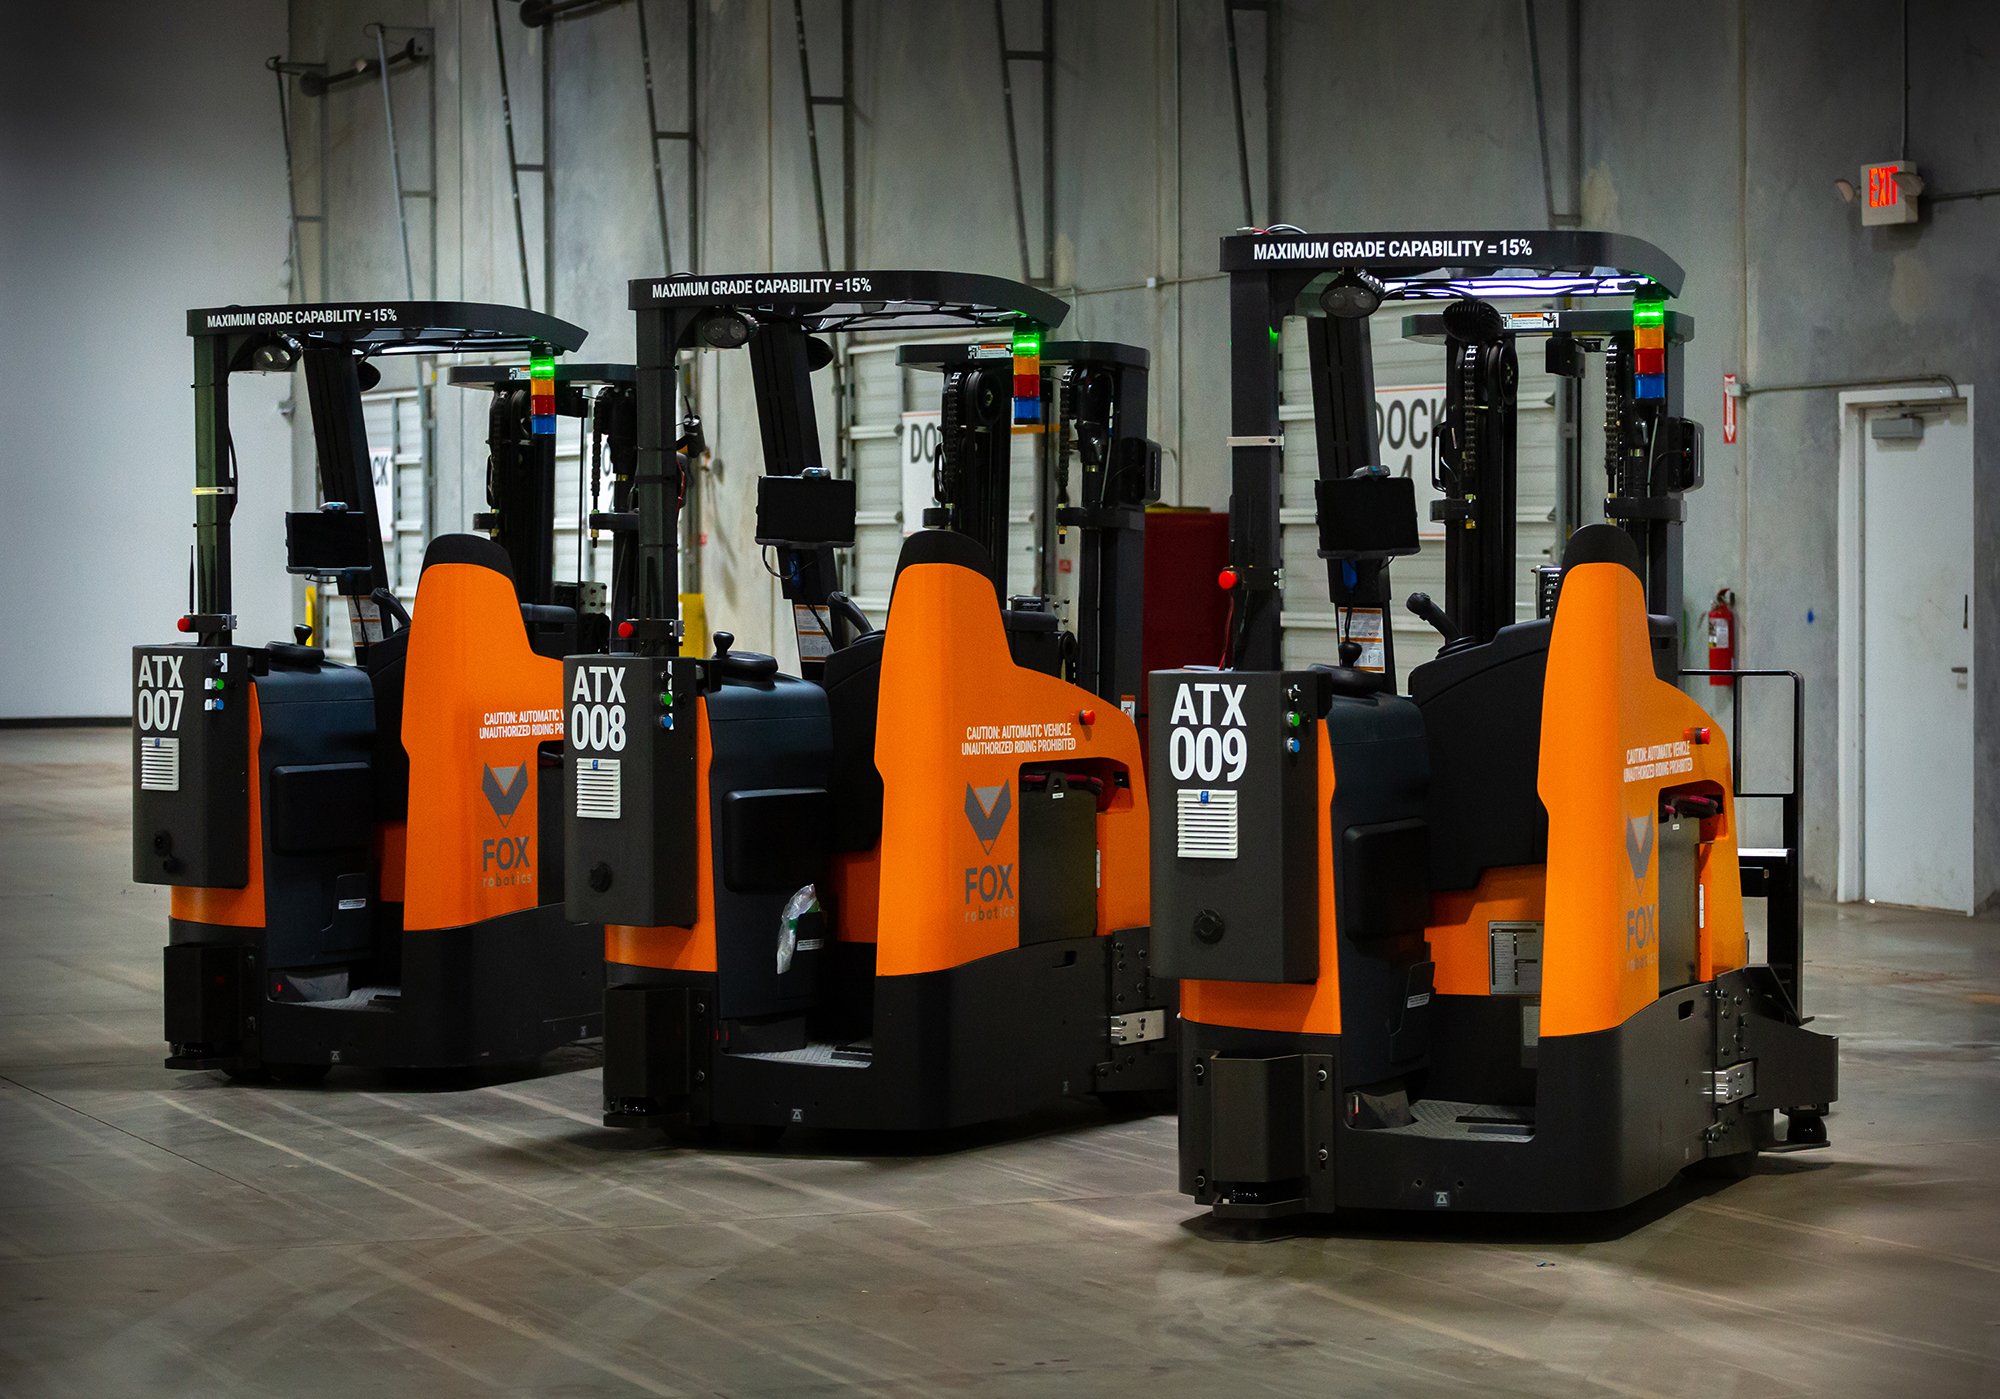 Fox Robotics’ autonomous forklift, the FoxBot, will now operate in four Walmart distribution centers